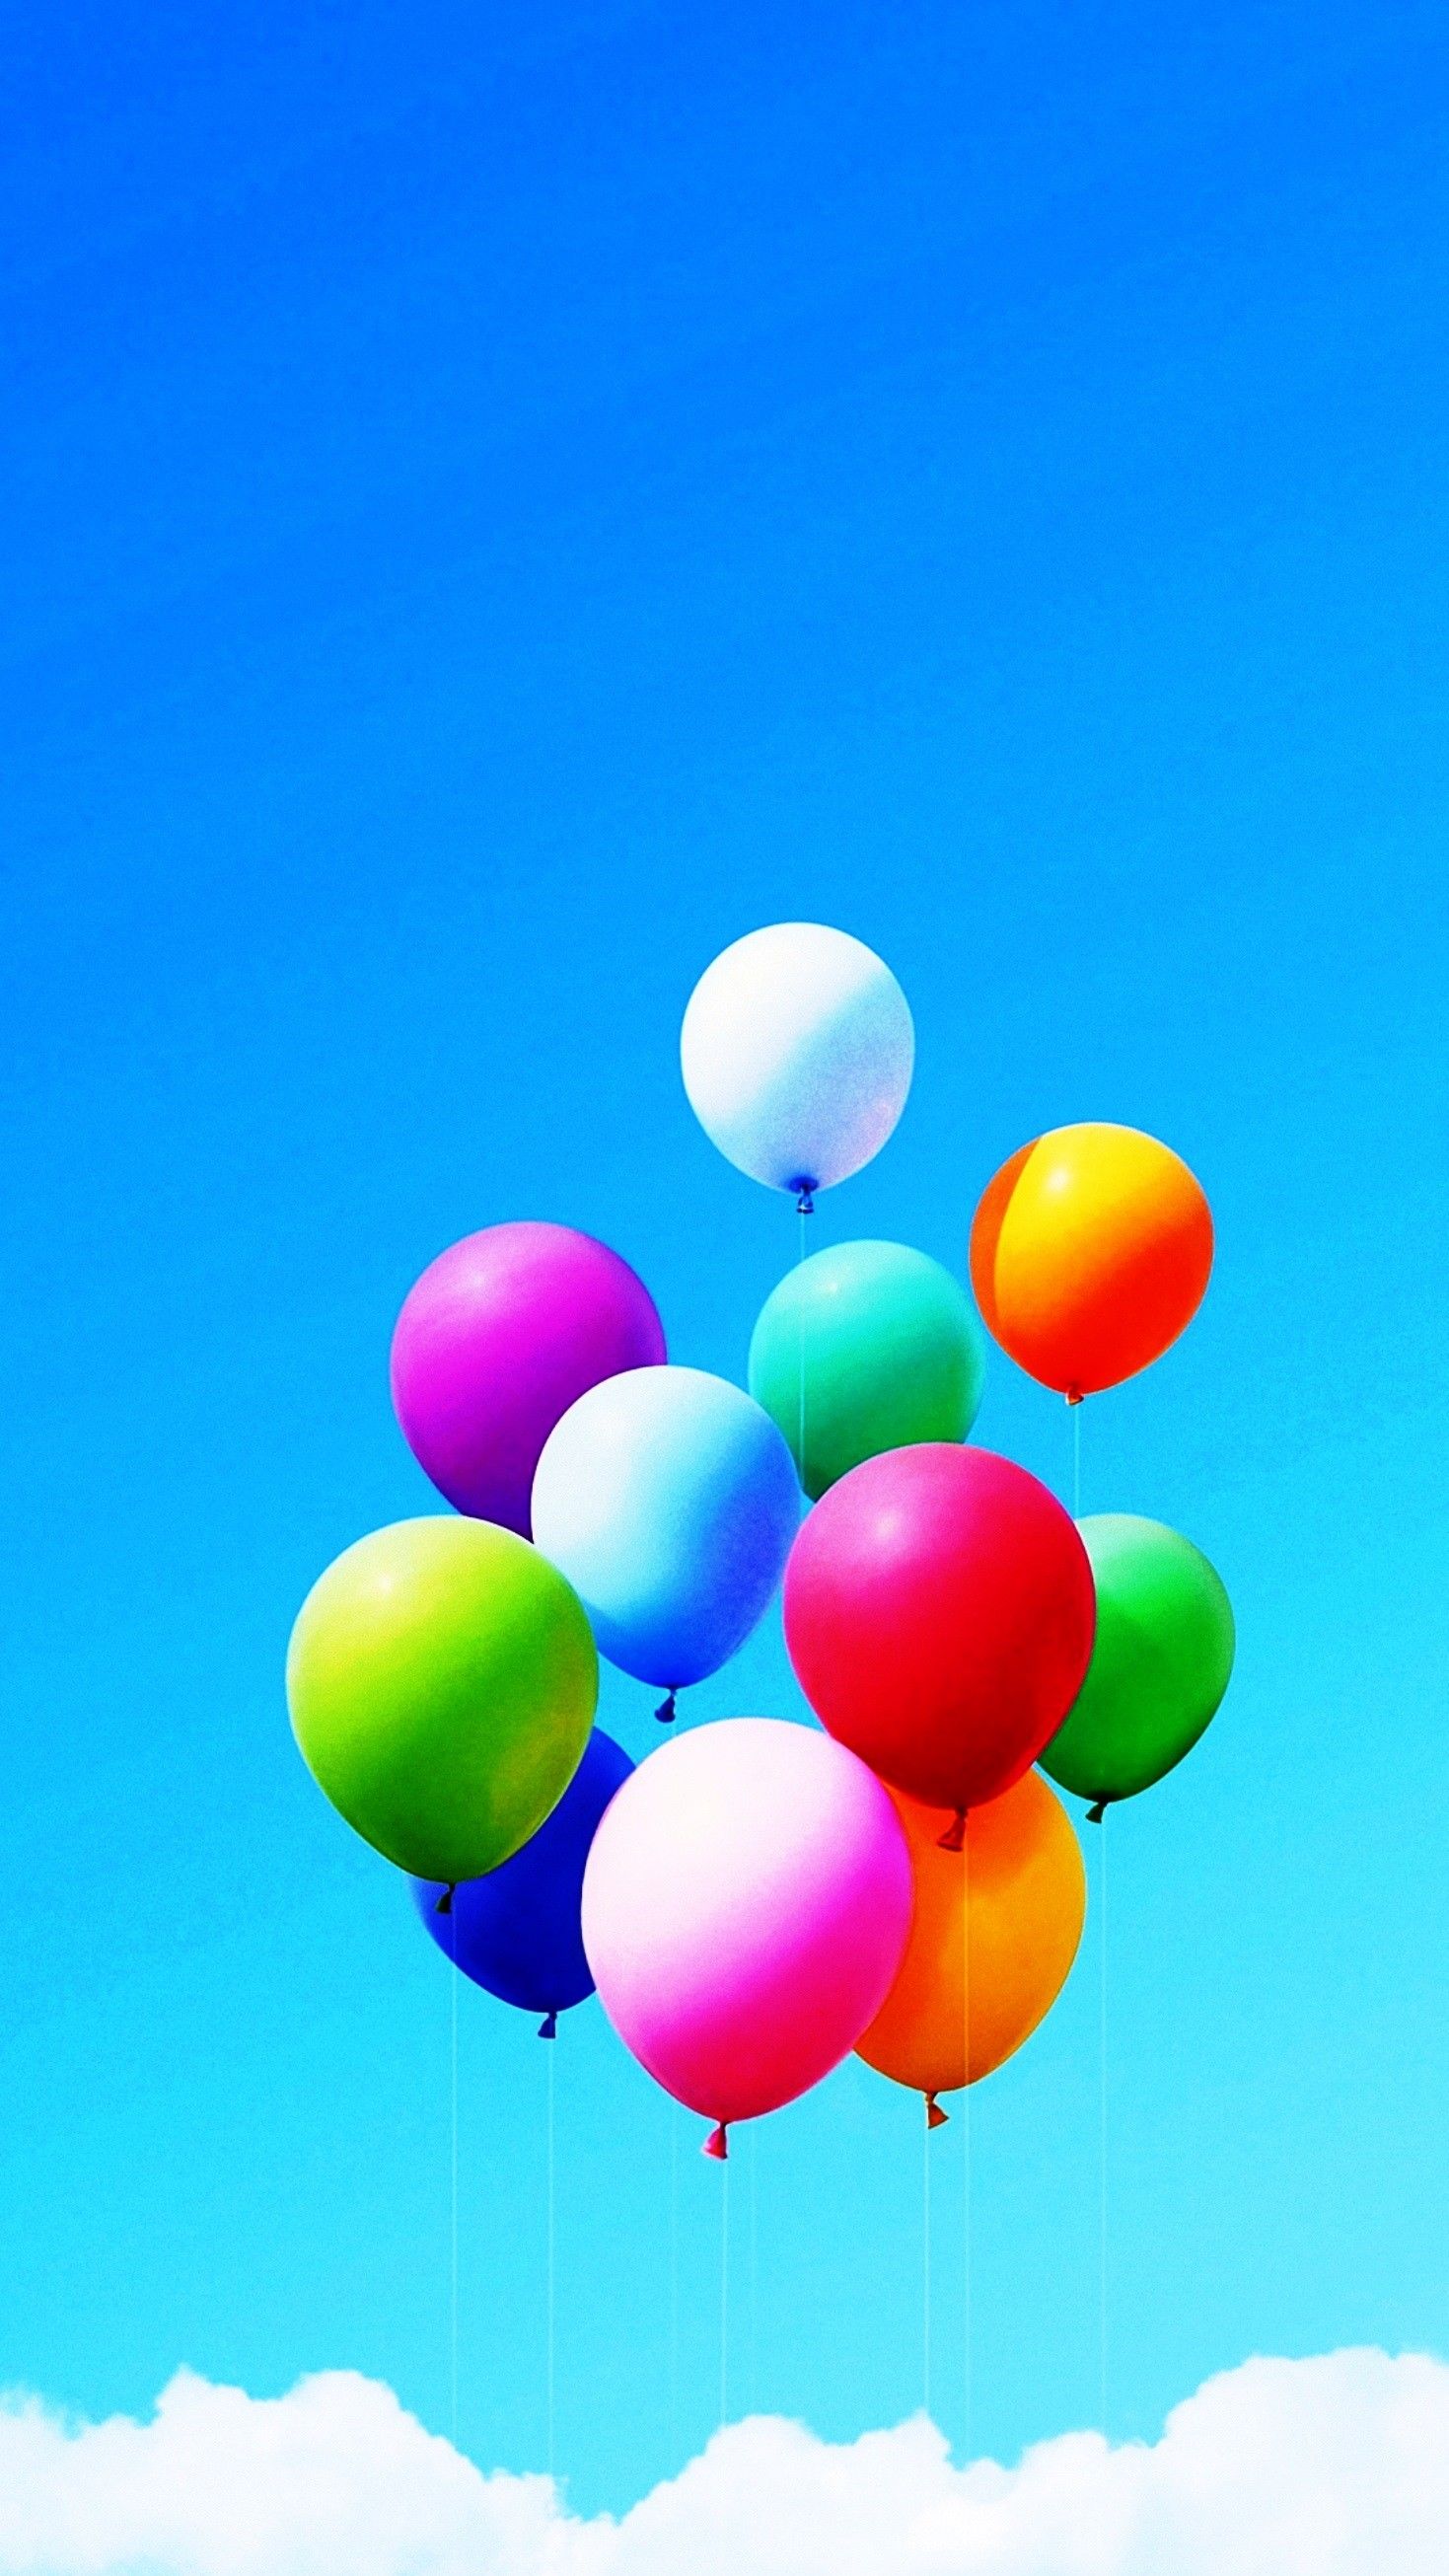 Mobile Wallpapers - Download HD Mobile Backgrounds